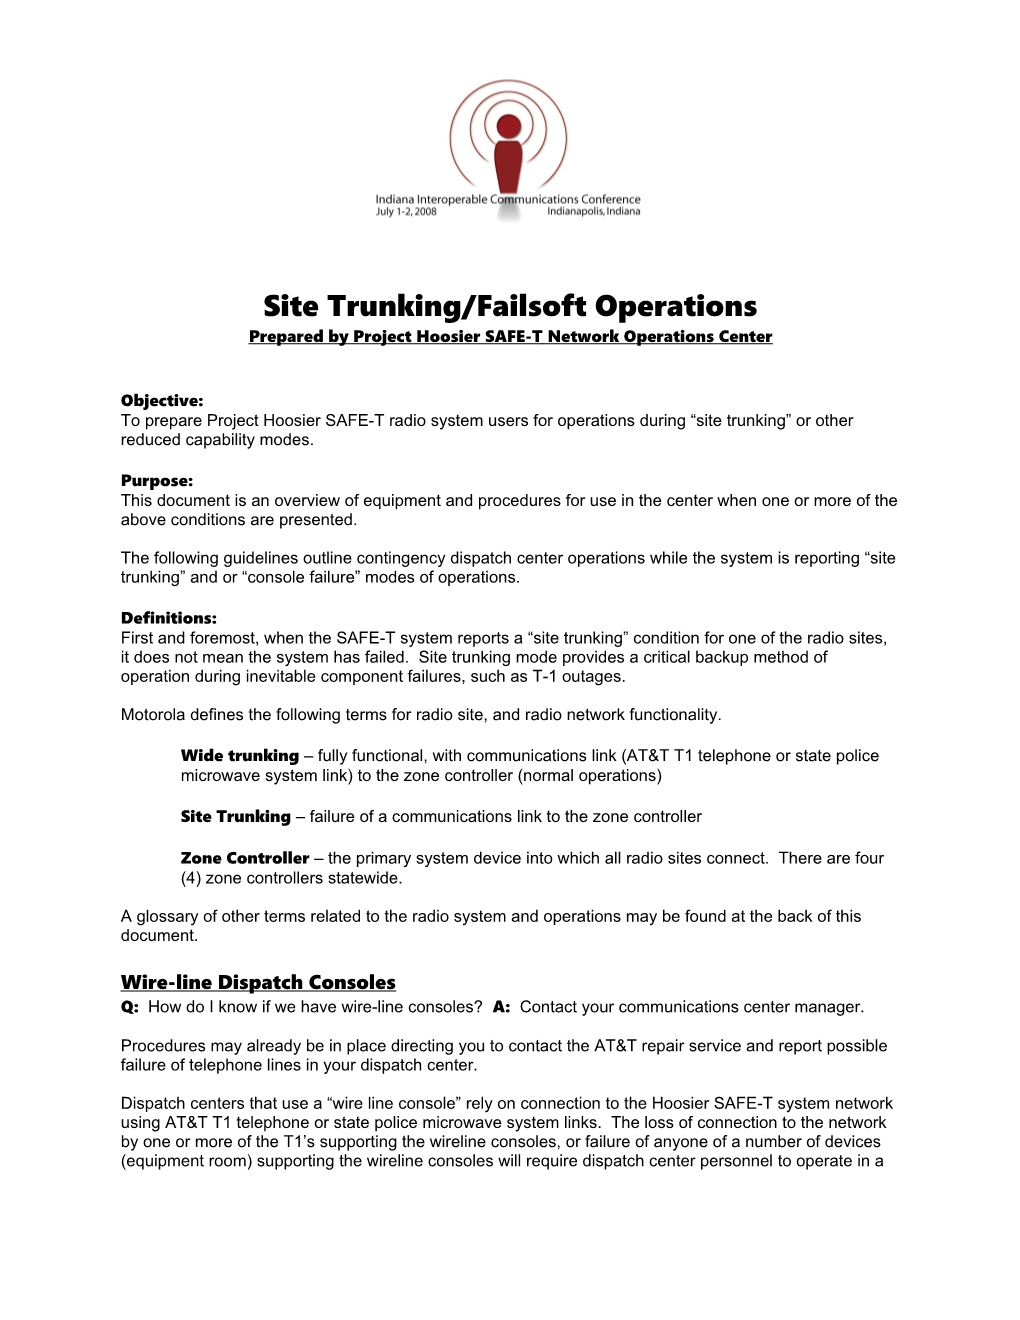 White Paper on Radio Operations in Reduced System Capability